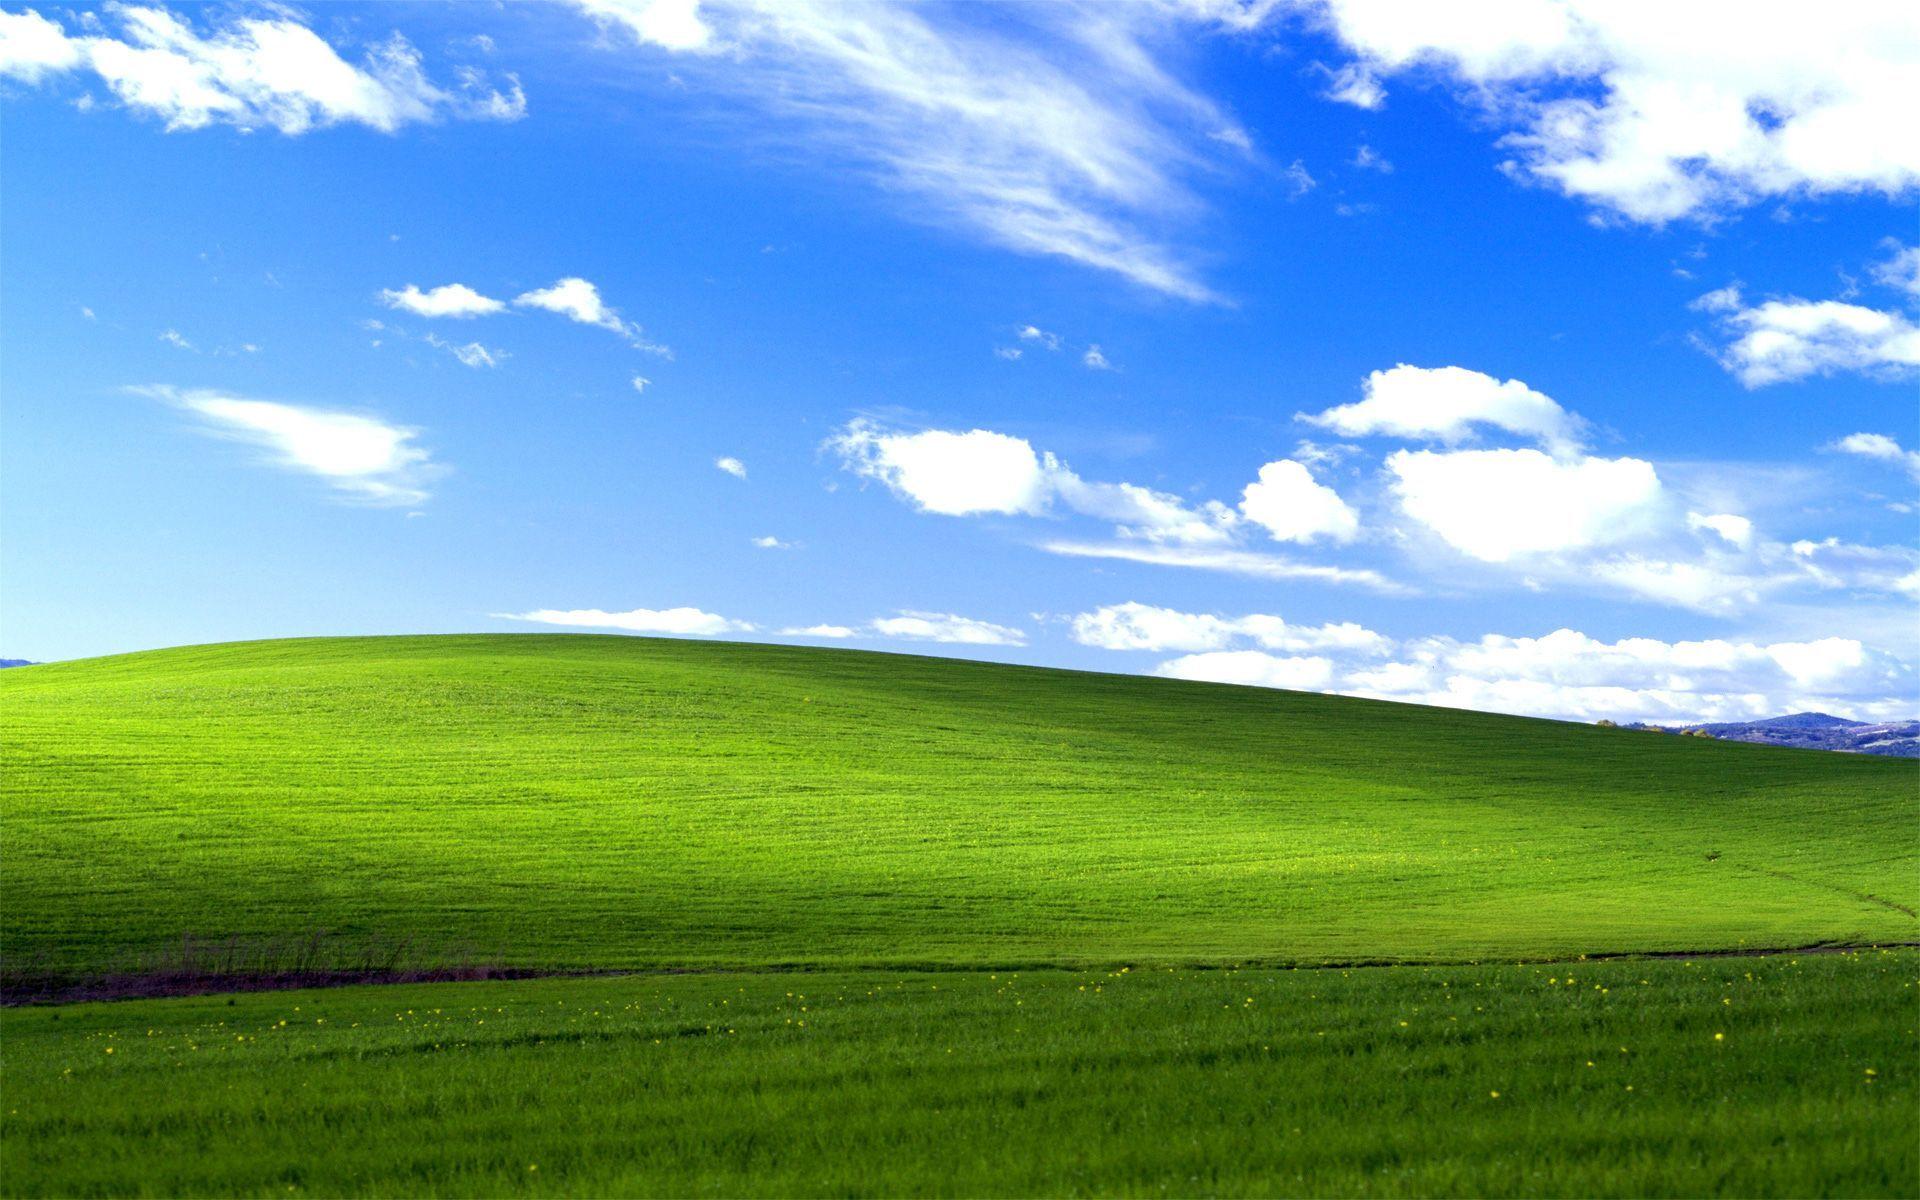 Image result for early 2000s windows background. Windows xp